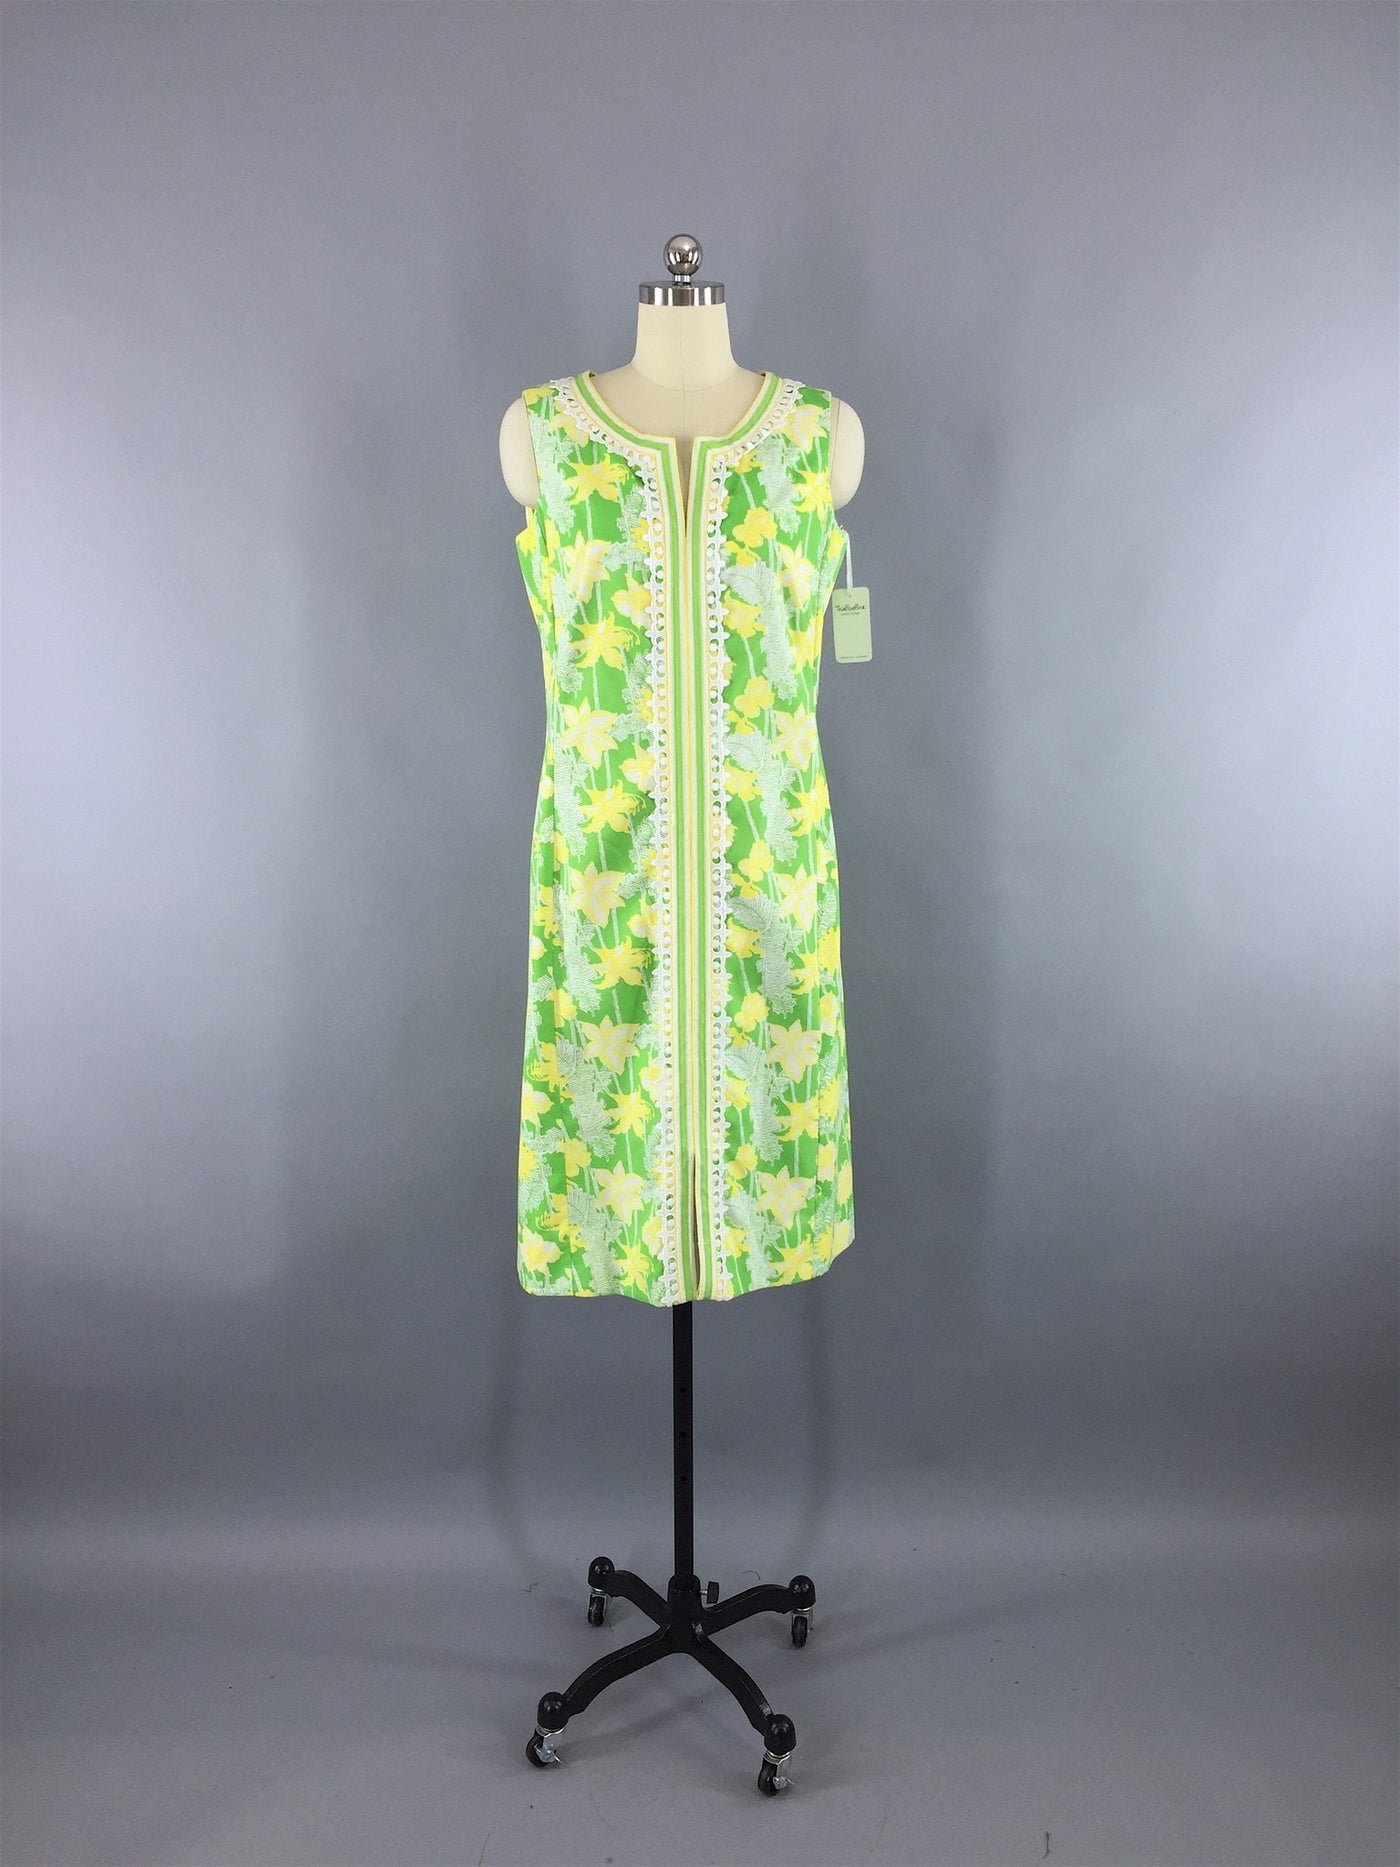 Vintage 1960s Lilly Pulitzer Dress / Green Yellow Floral Print - ThisBlueBird